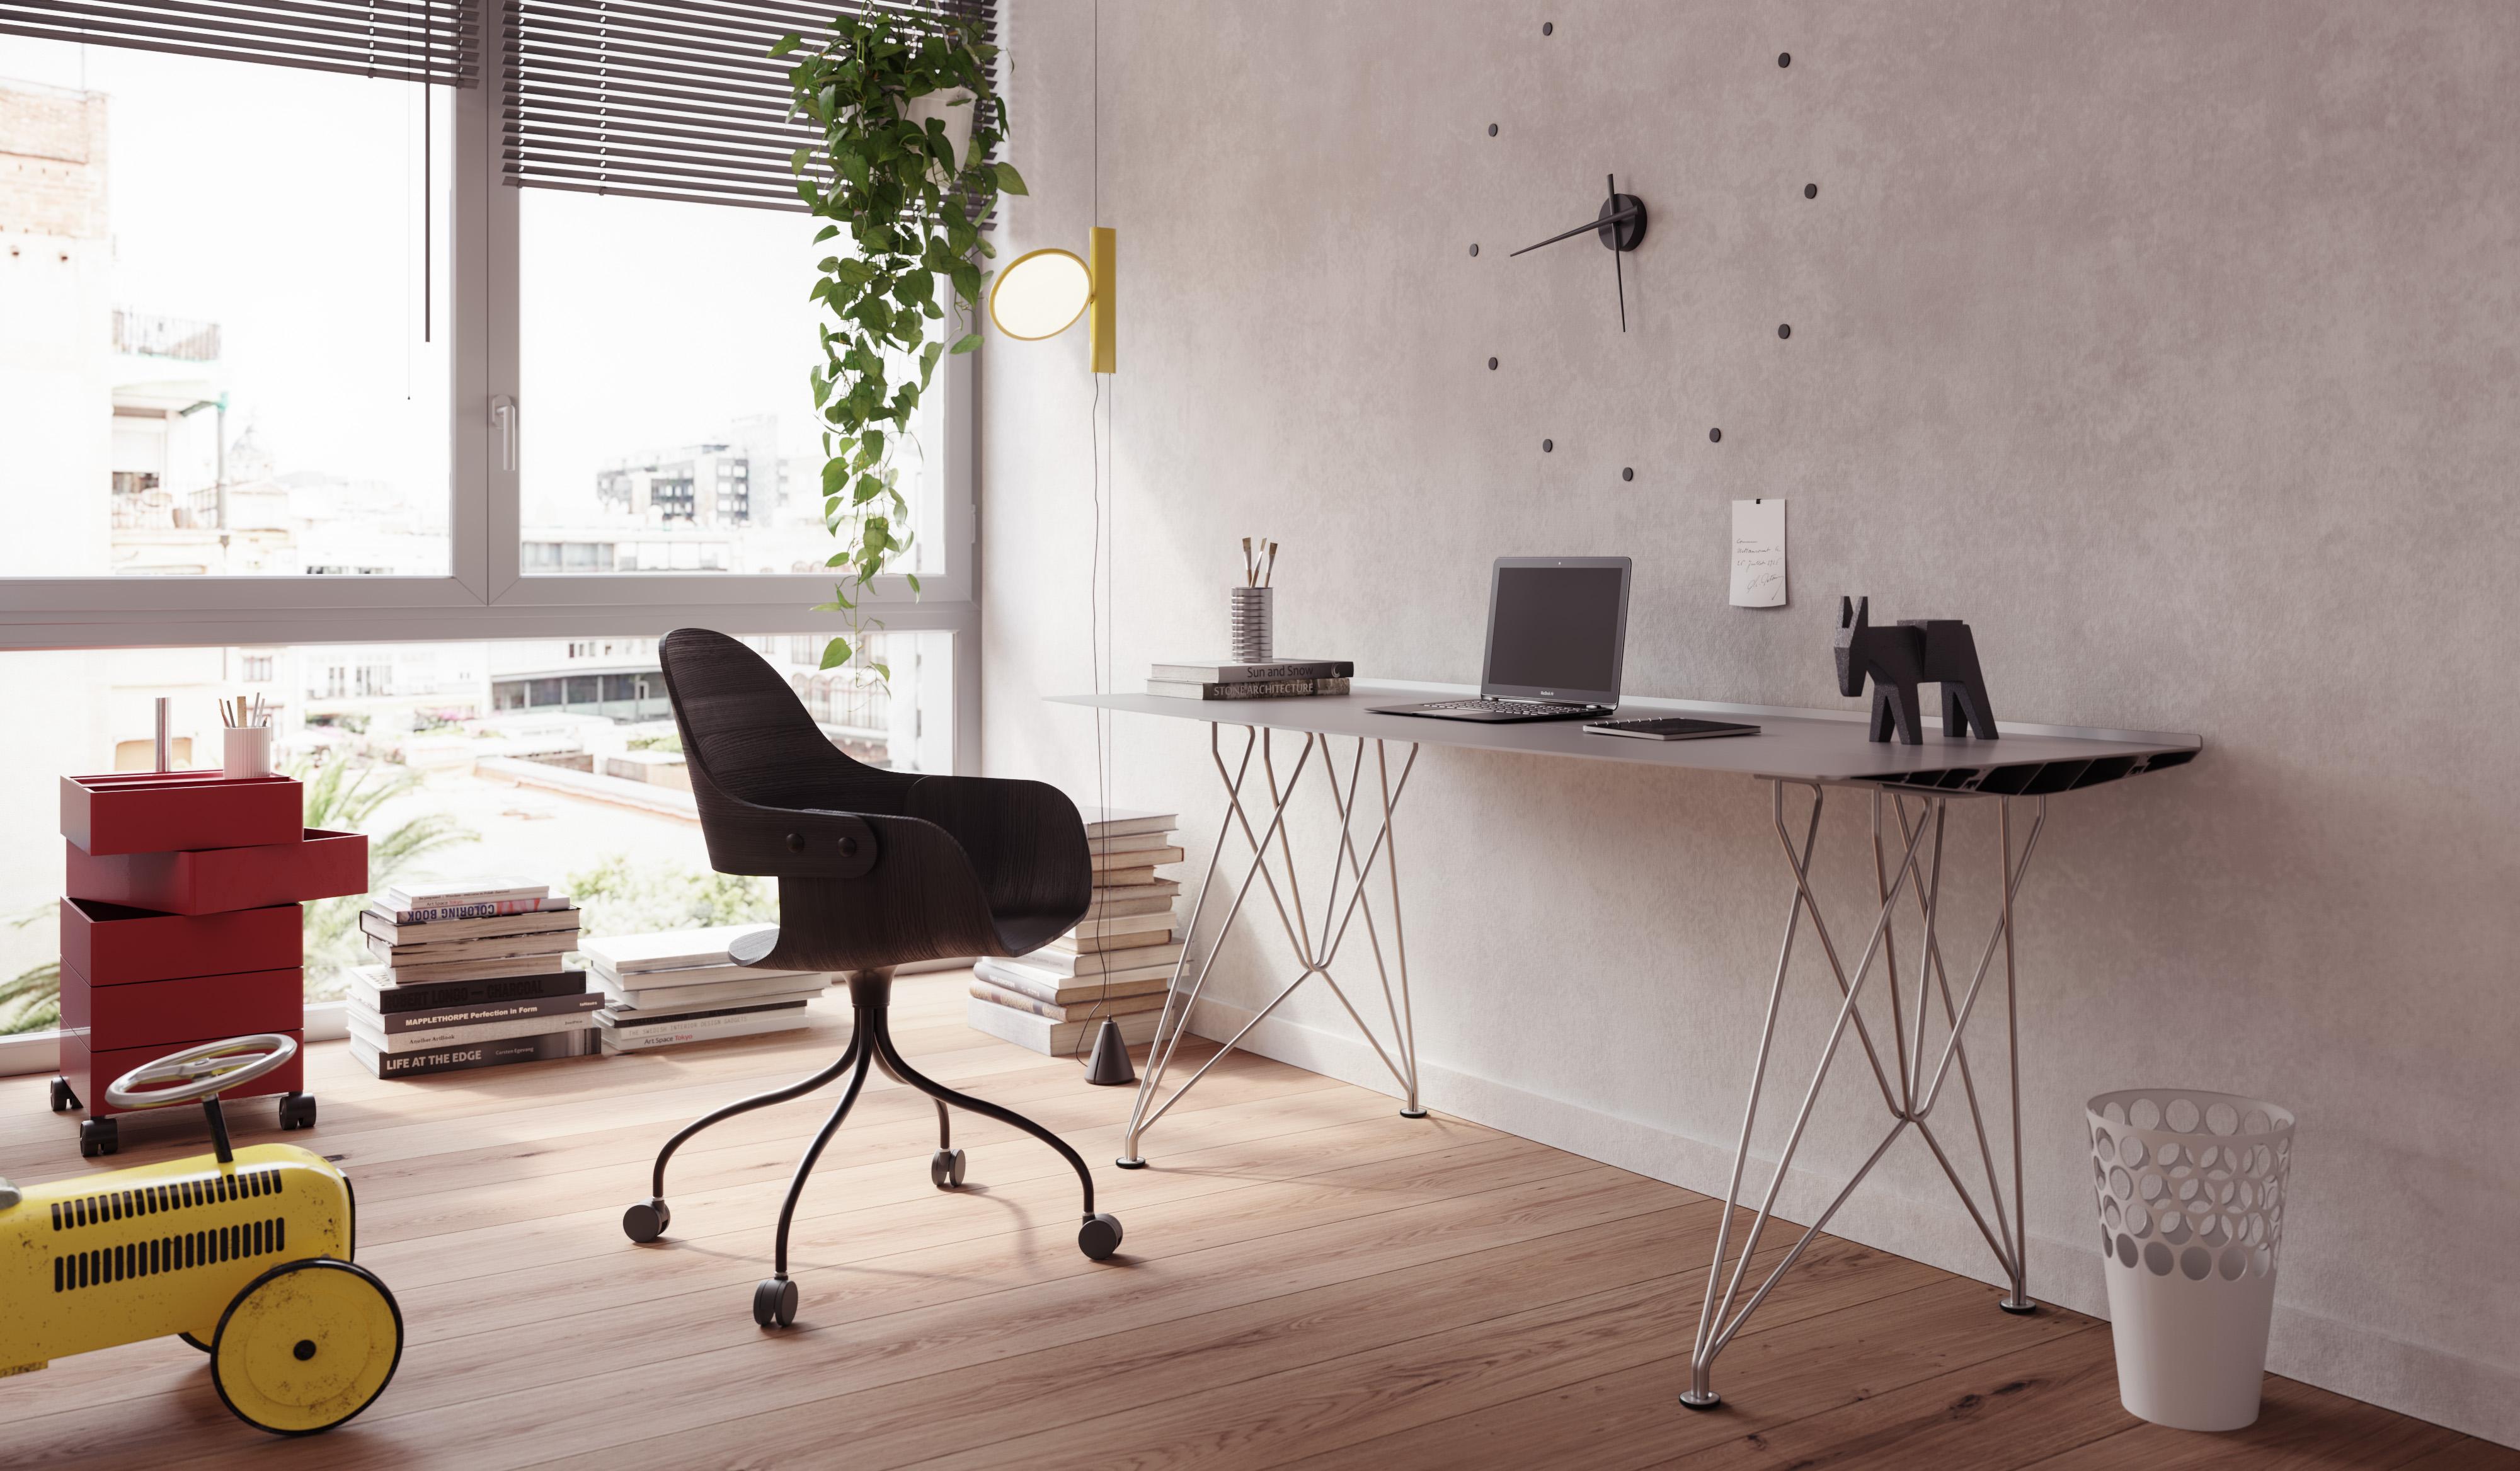 Spanish Wall Mounted Table B Desk by Konstantin Grcic For Sale